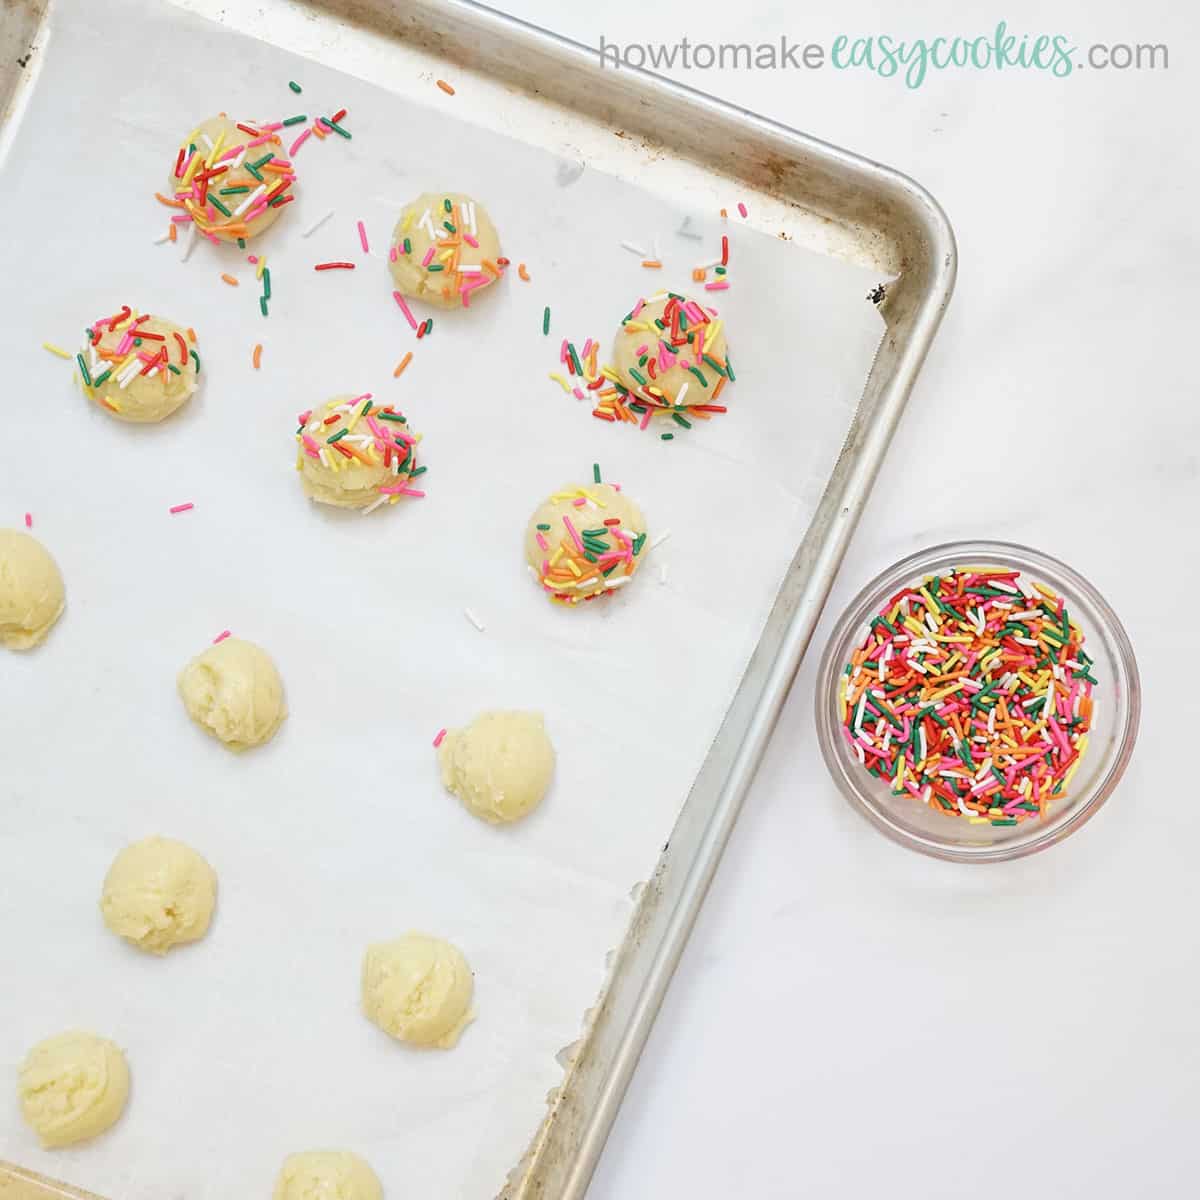 rolling white cake mix cookies in rainbow sprinkles